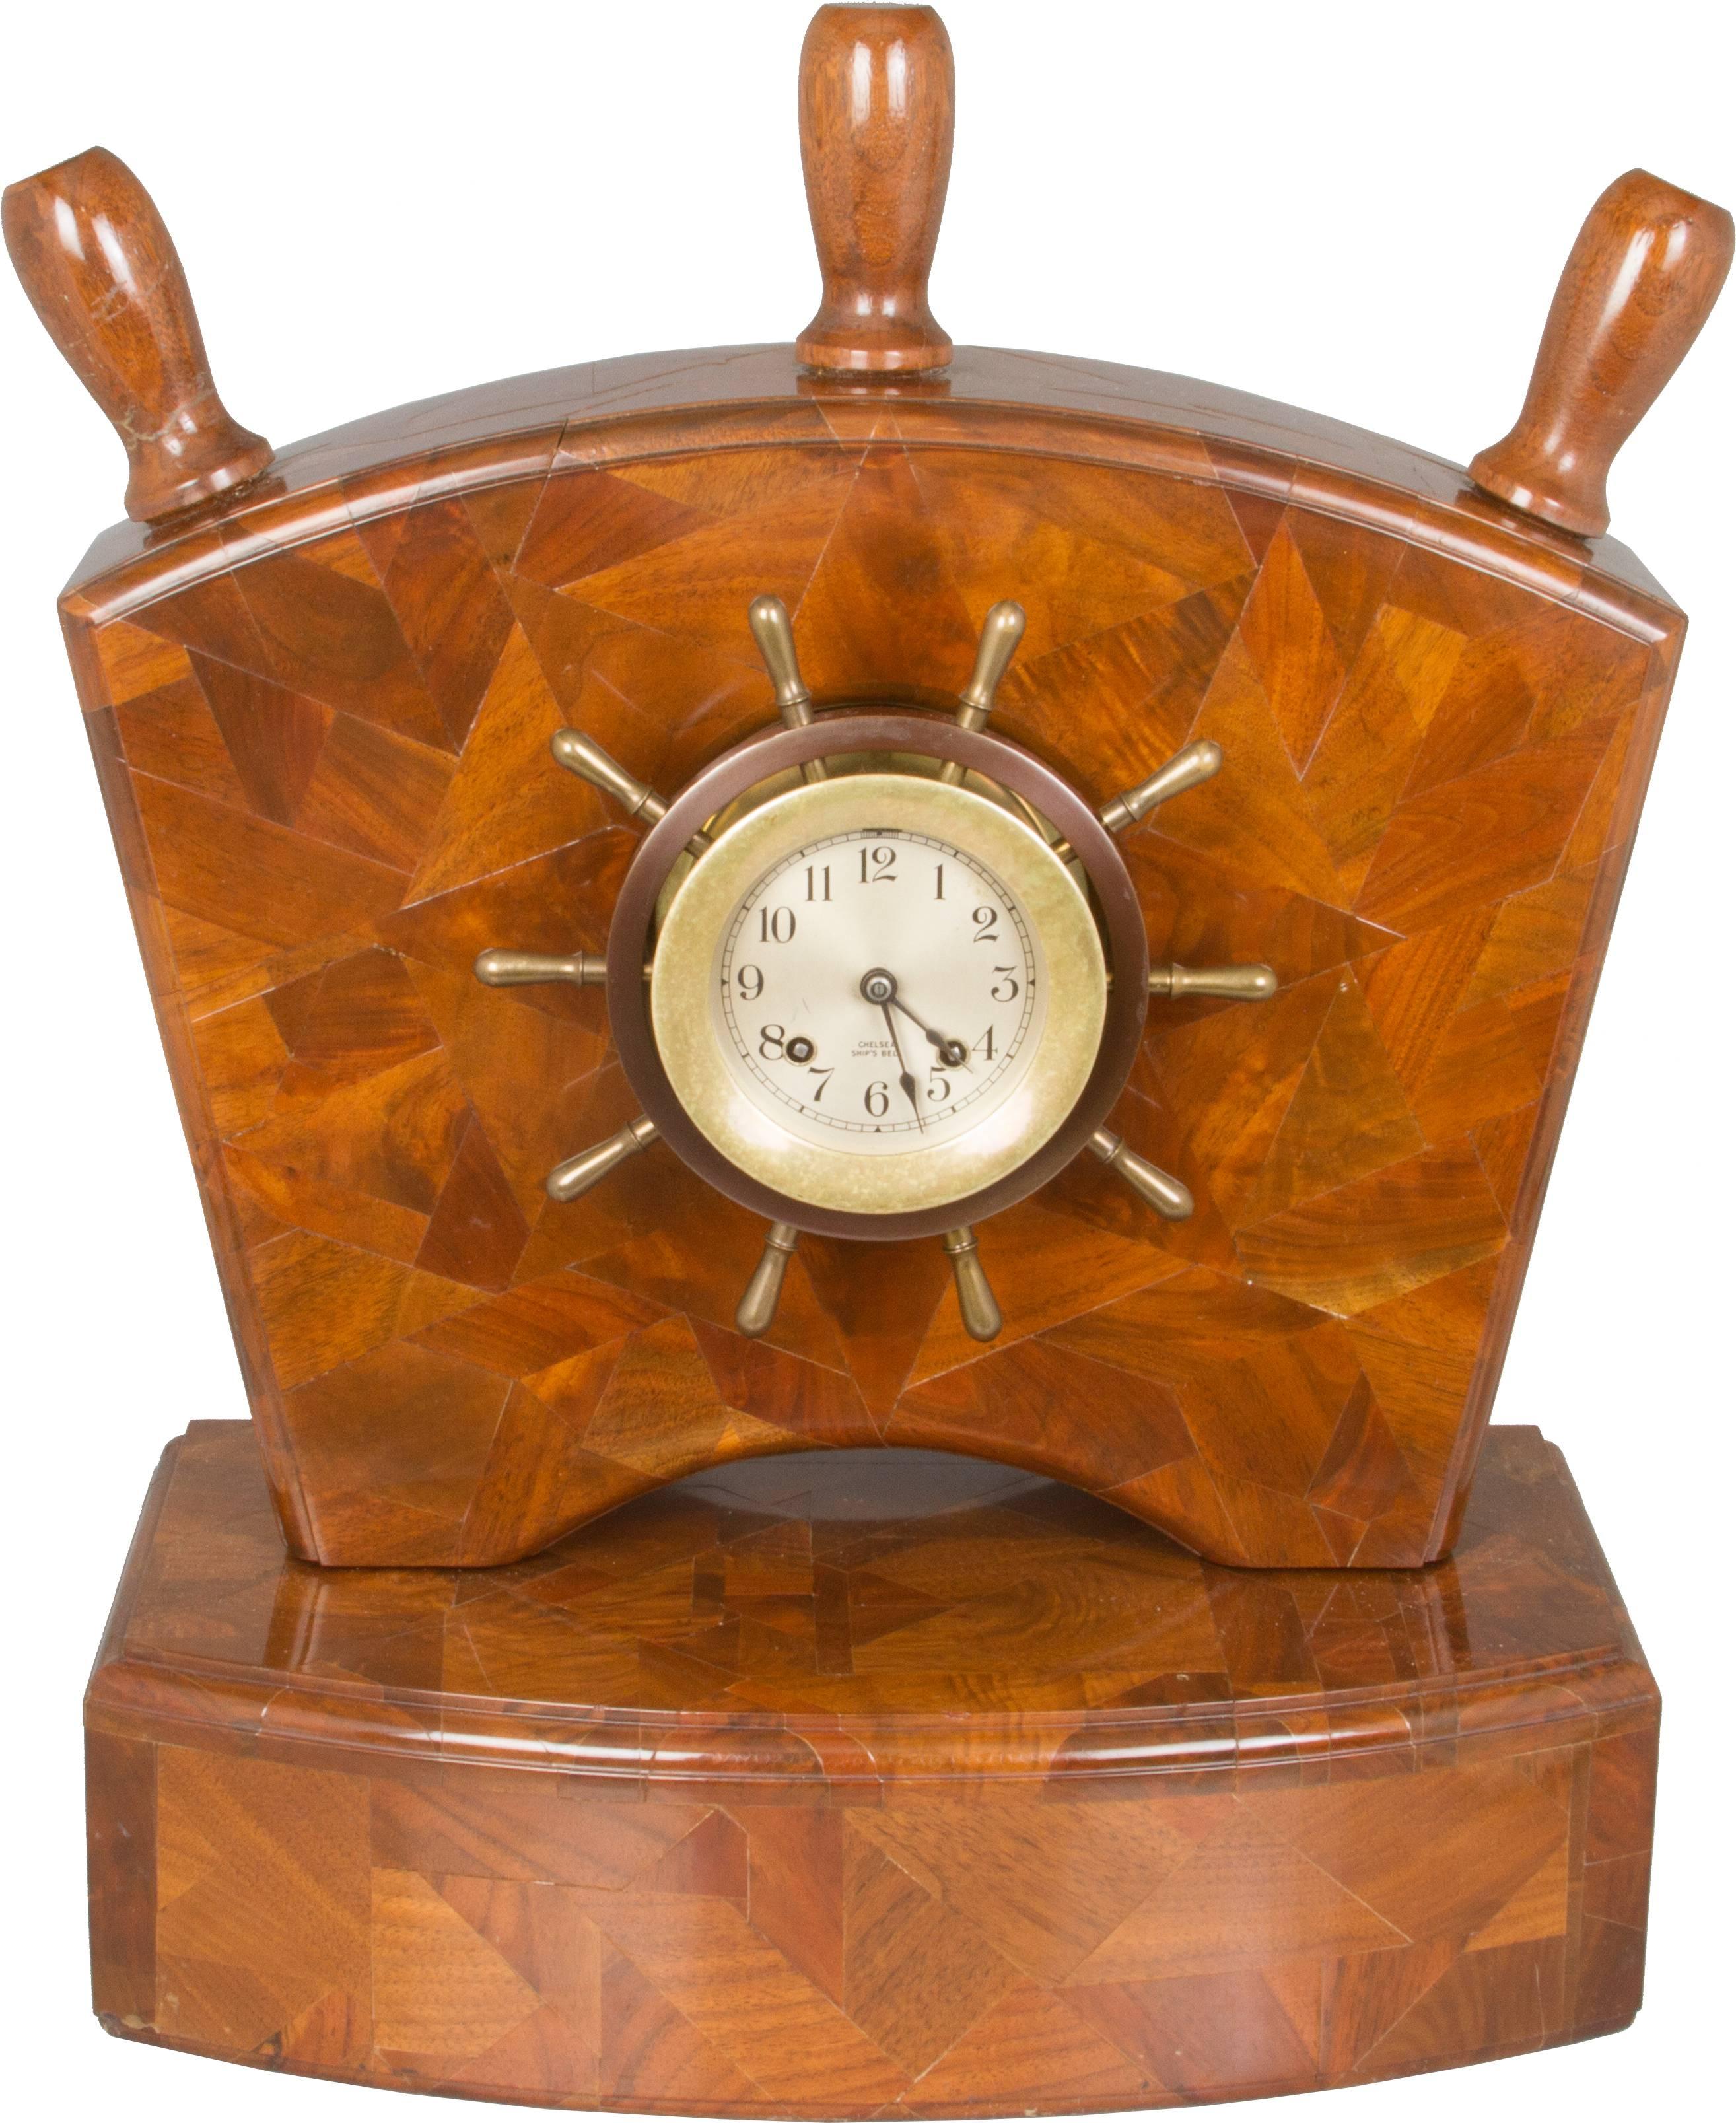 This is a fabulous piece! The clock is in the shape of a yacht's wheel and is mounted into a wooden parquetry holder, the design is also mimicking the elements of a ships wheel.